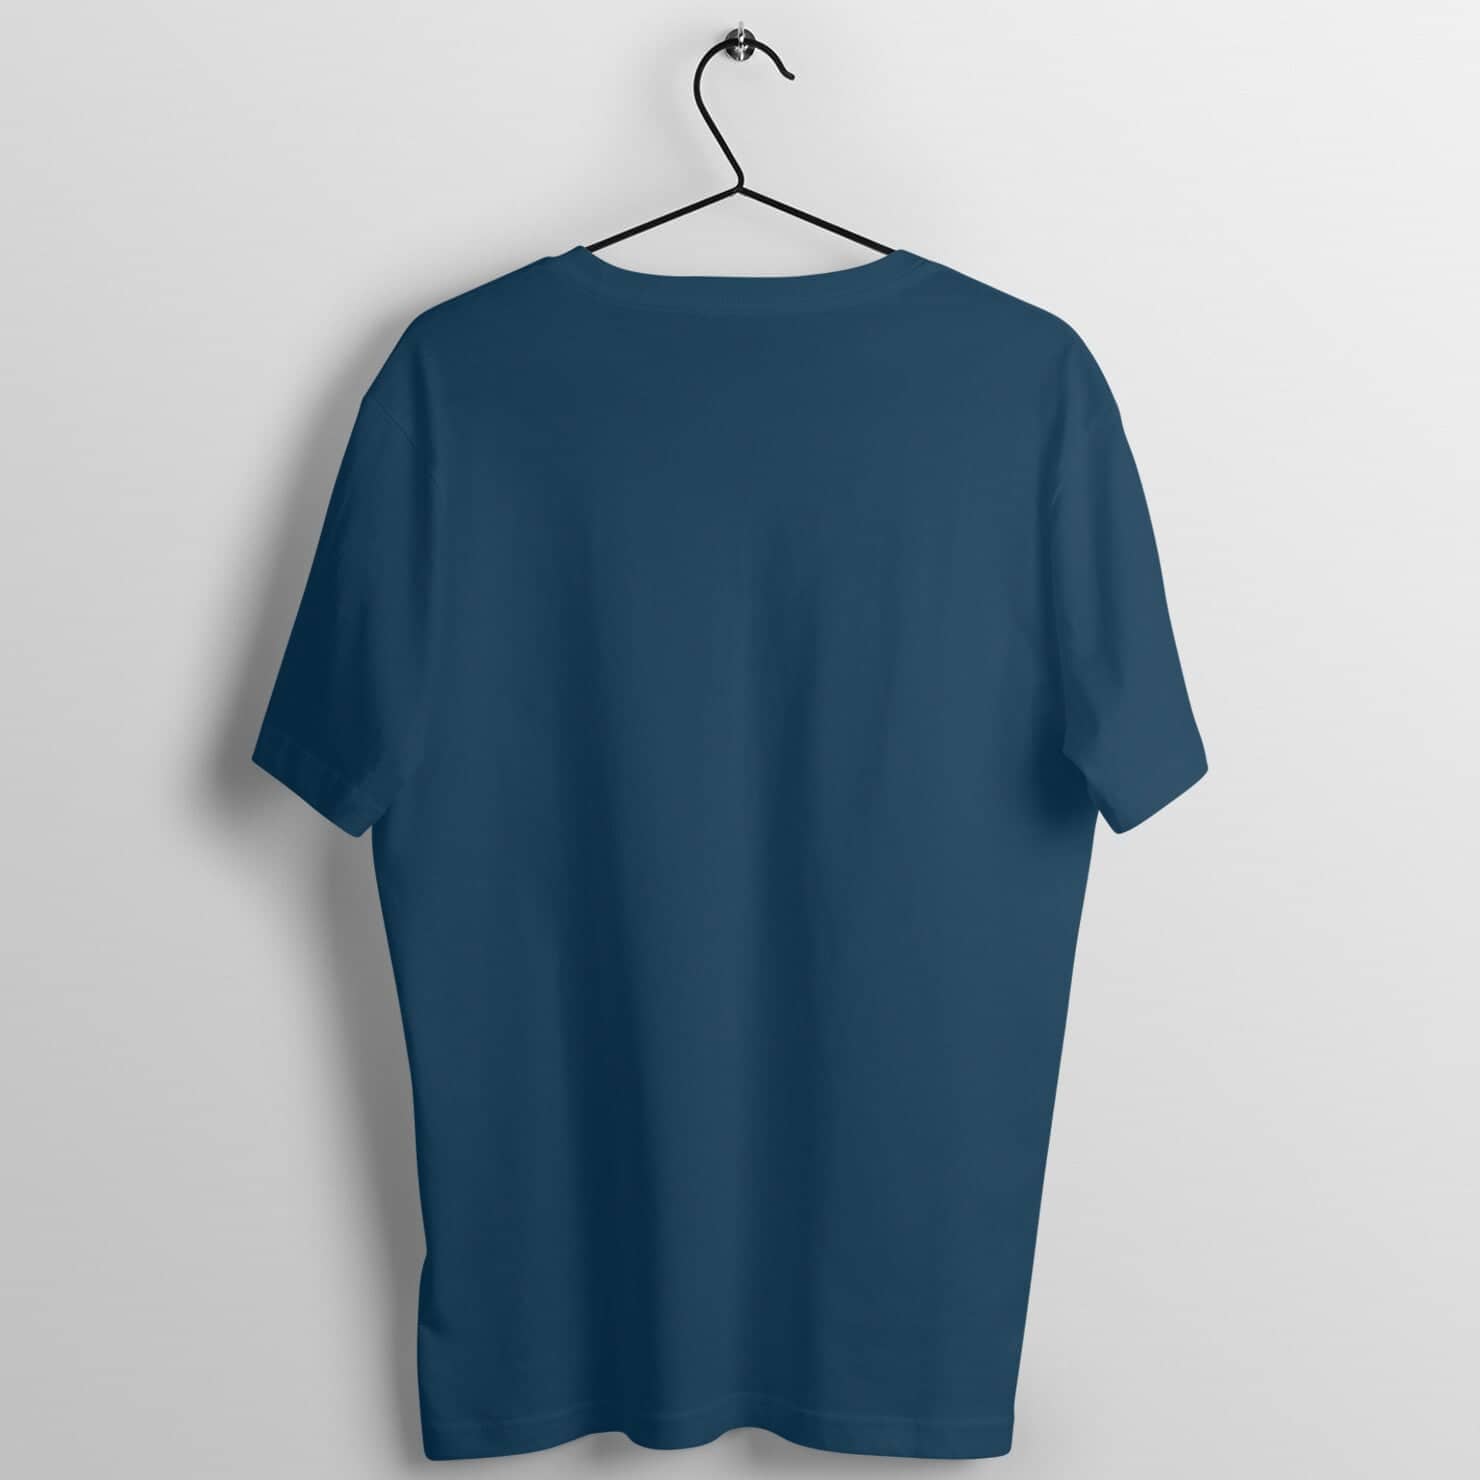 Creative Exclusive Artistic Navy Blue T Shirt for Men and Women Printrove 